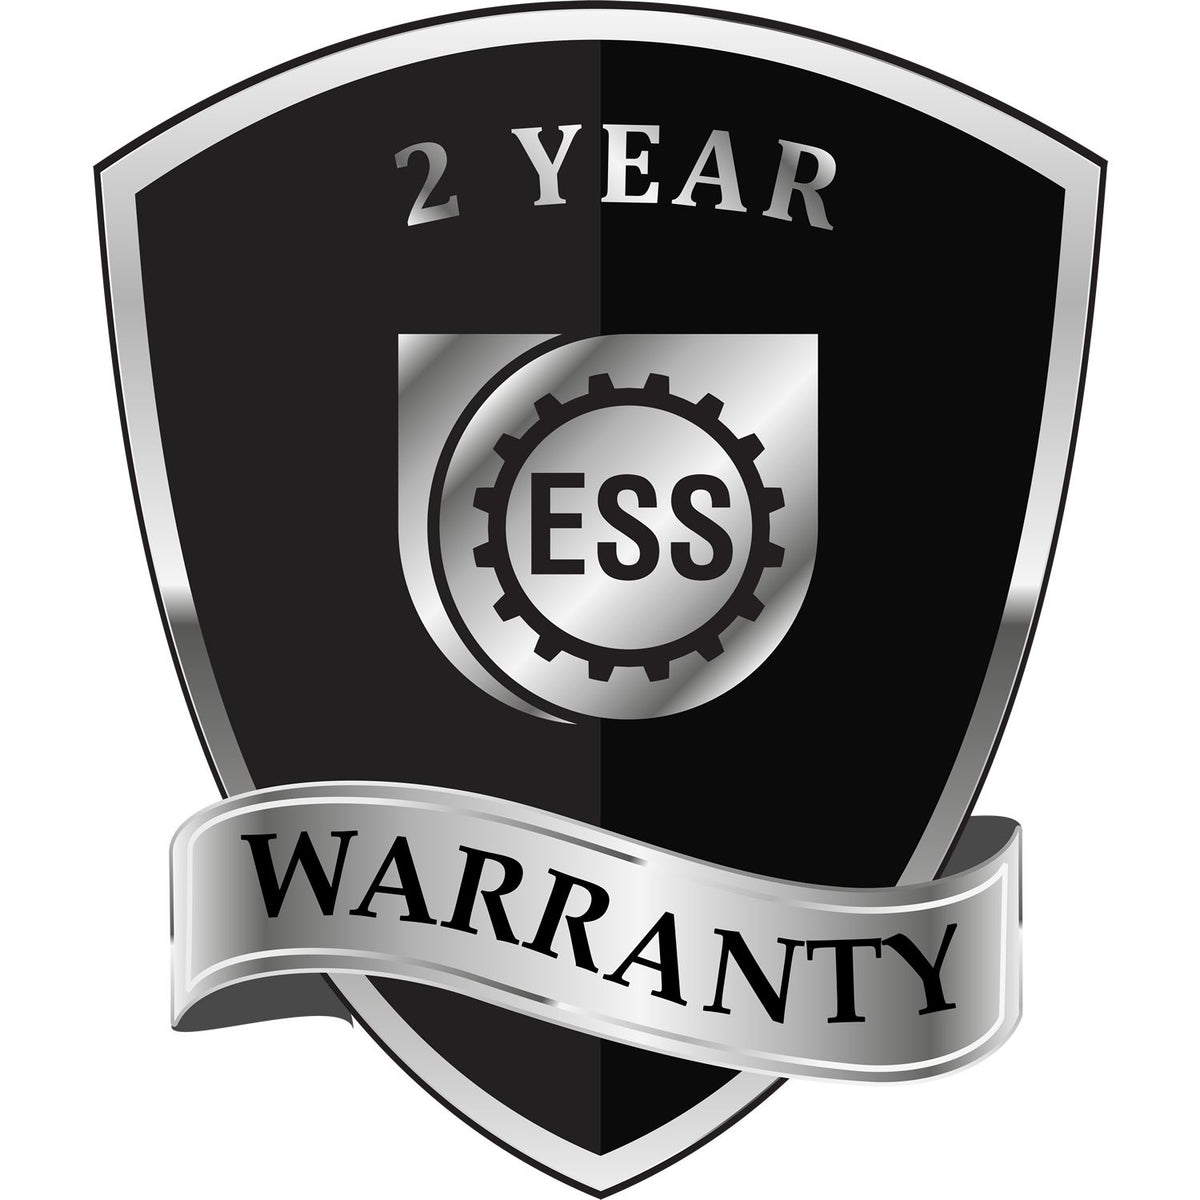 A black and silver badge or emblem showing warranty information for the Gift Tennessee Geologist Seal